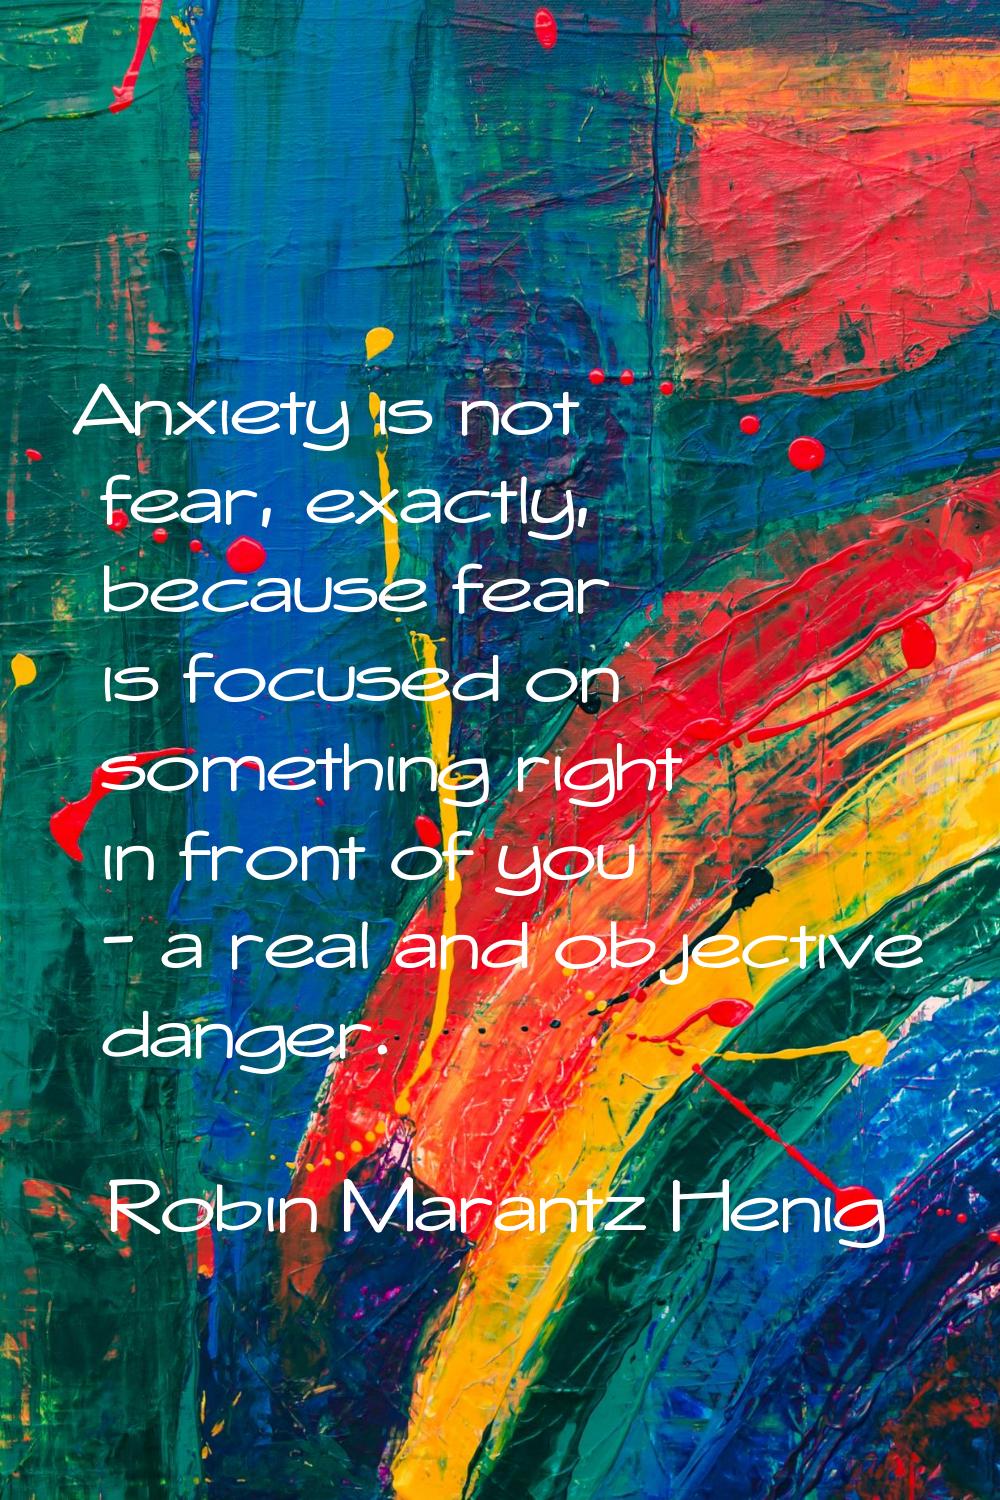 Anxiety is not fear, exactly, because fear is focused on something right in front of you - a real a